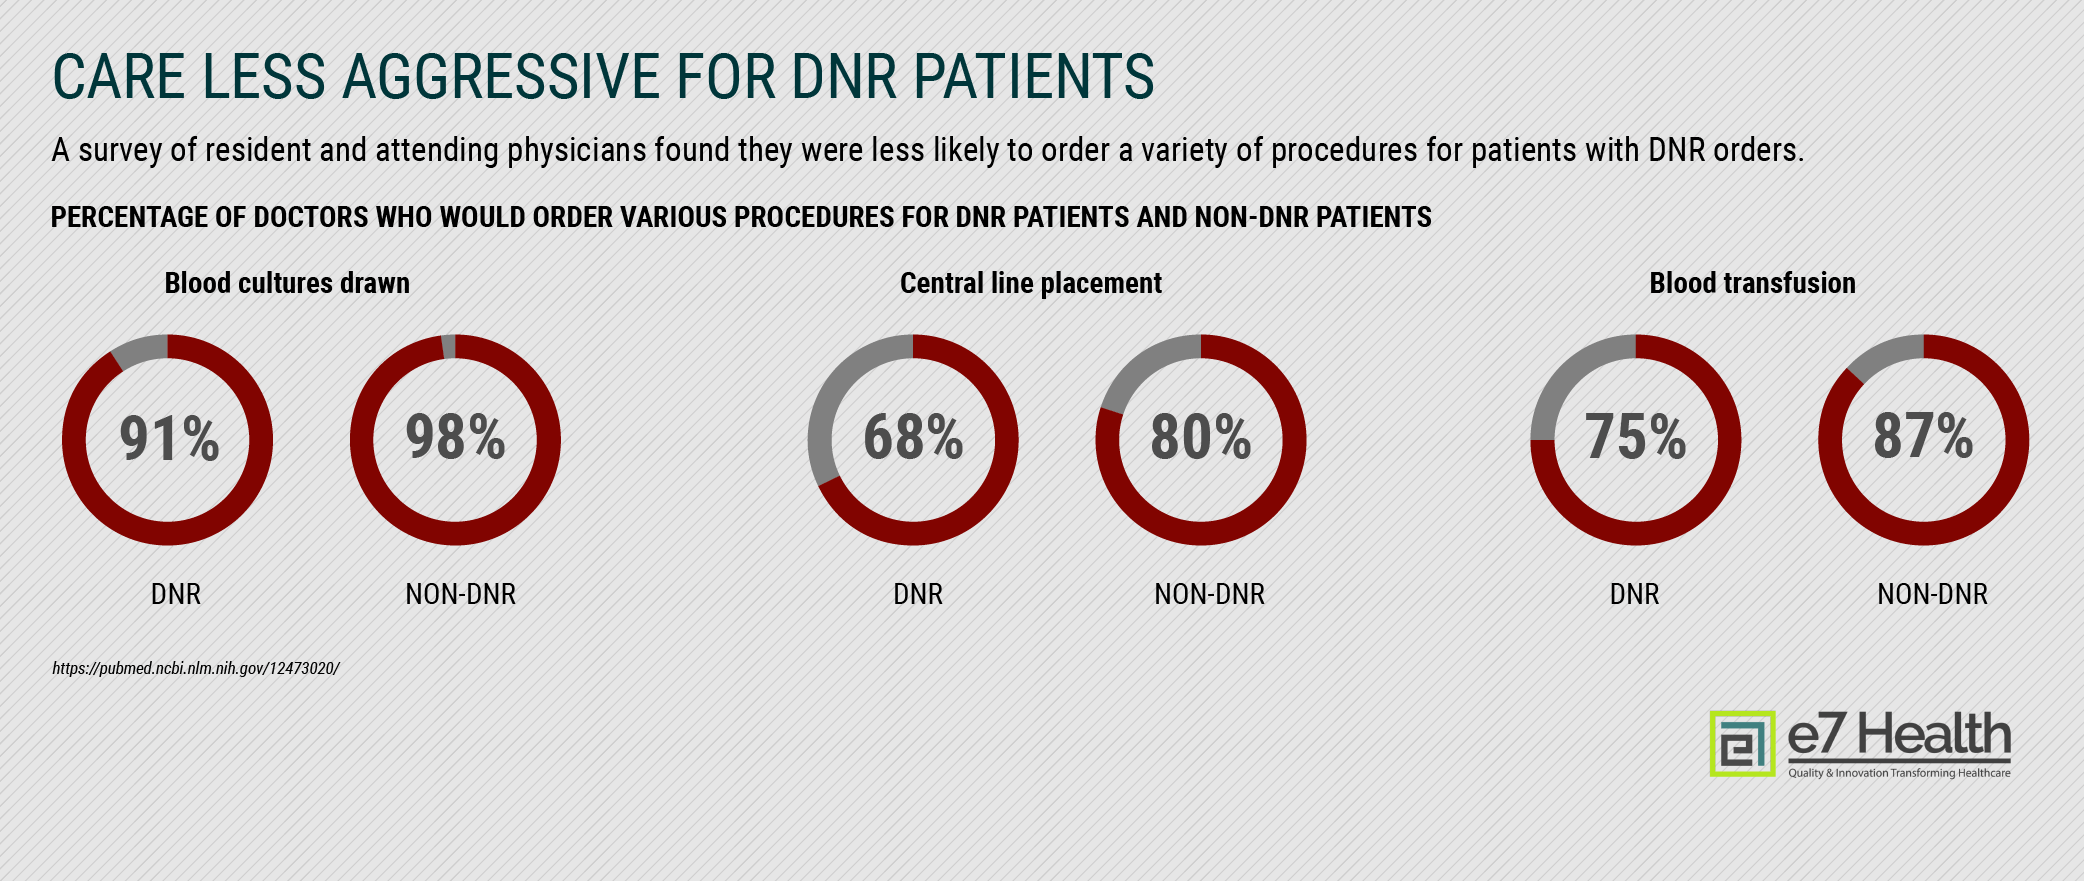 Care Less Aggressive for DNR Patients